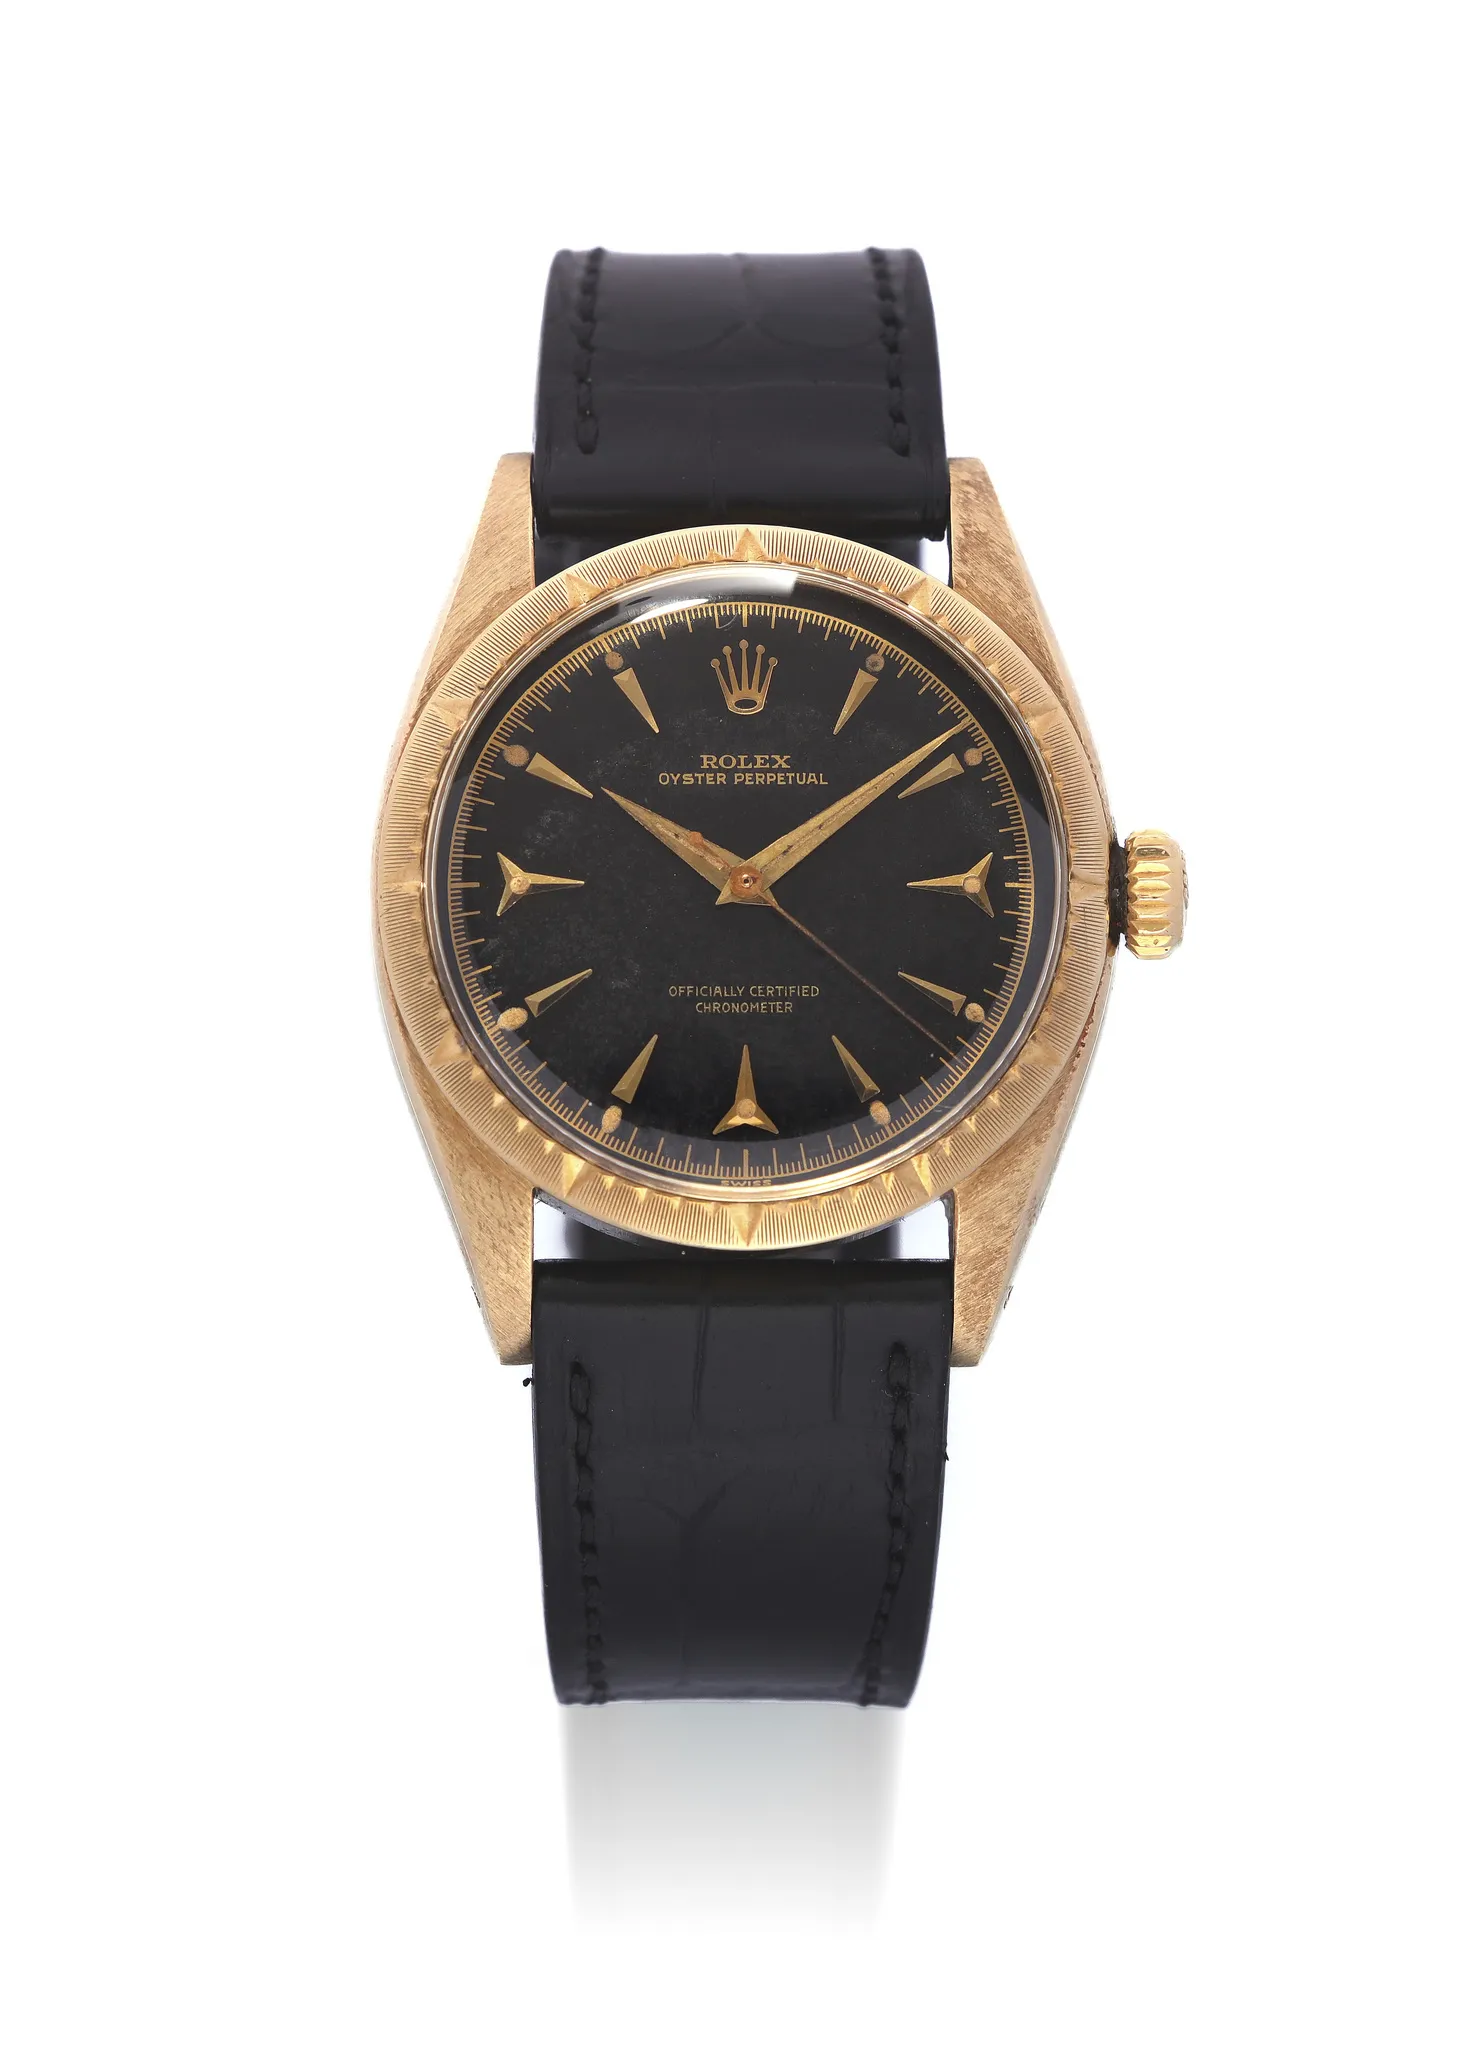 Rolex Oyster Perpetual 34 6582 35mm Yellow gold Black